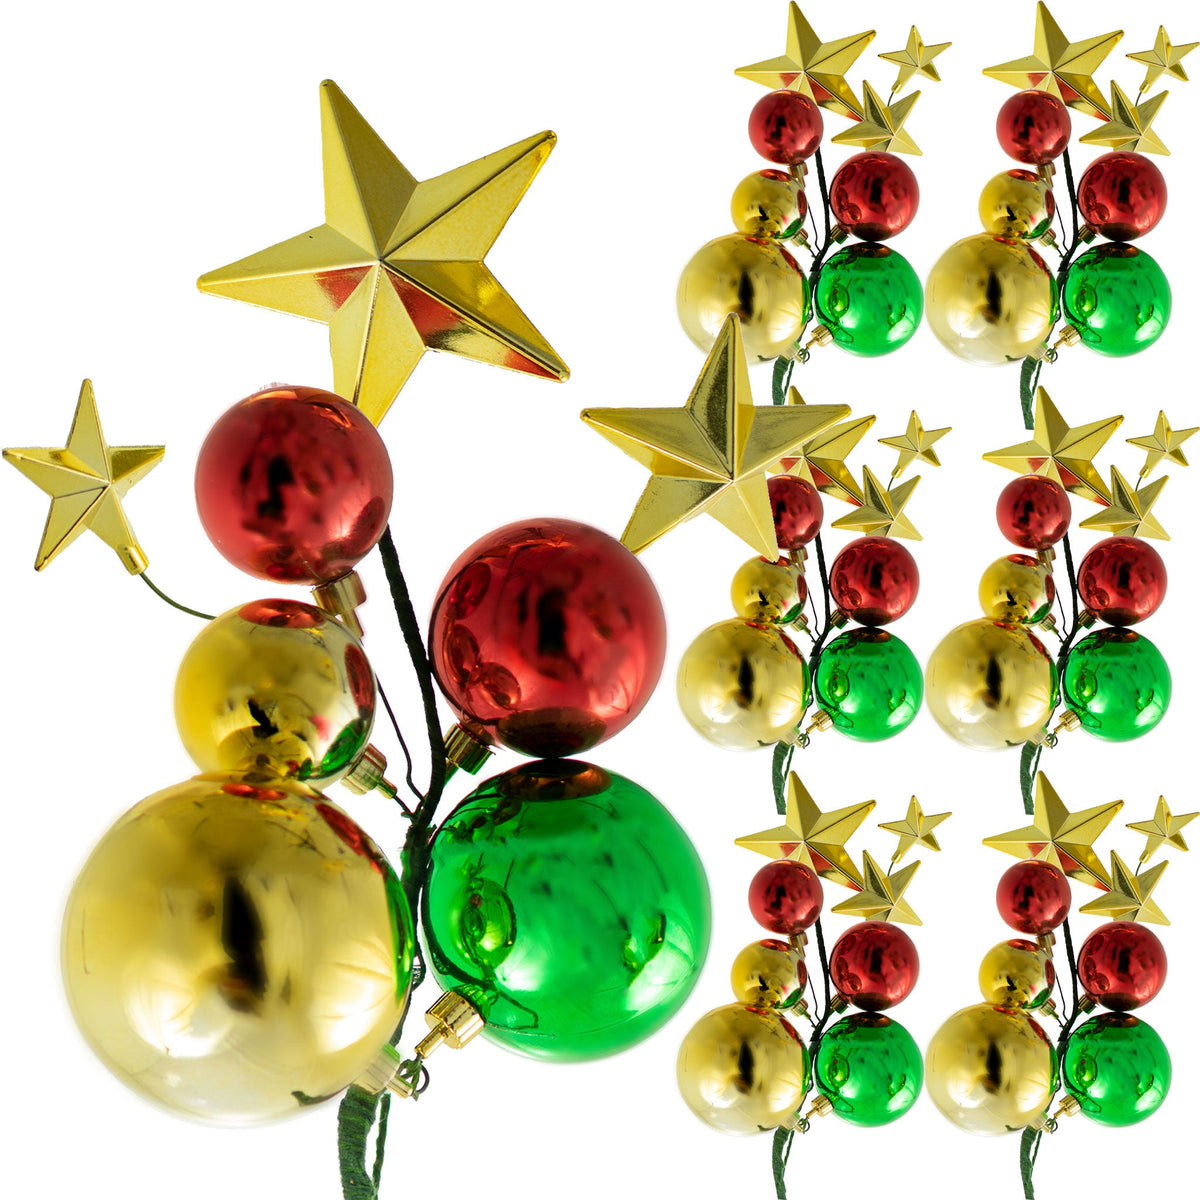 The San Jose Christmas Ball Clusters with Multi-Color Ornaments & Gold Stars are sold in sets of 6